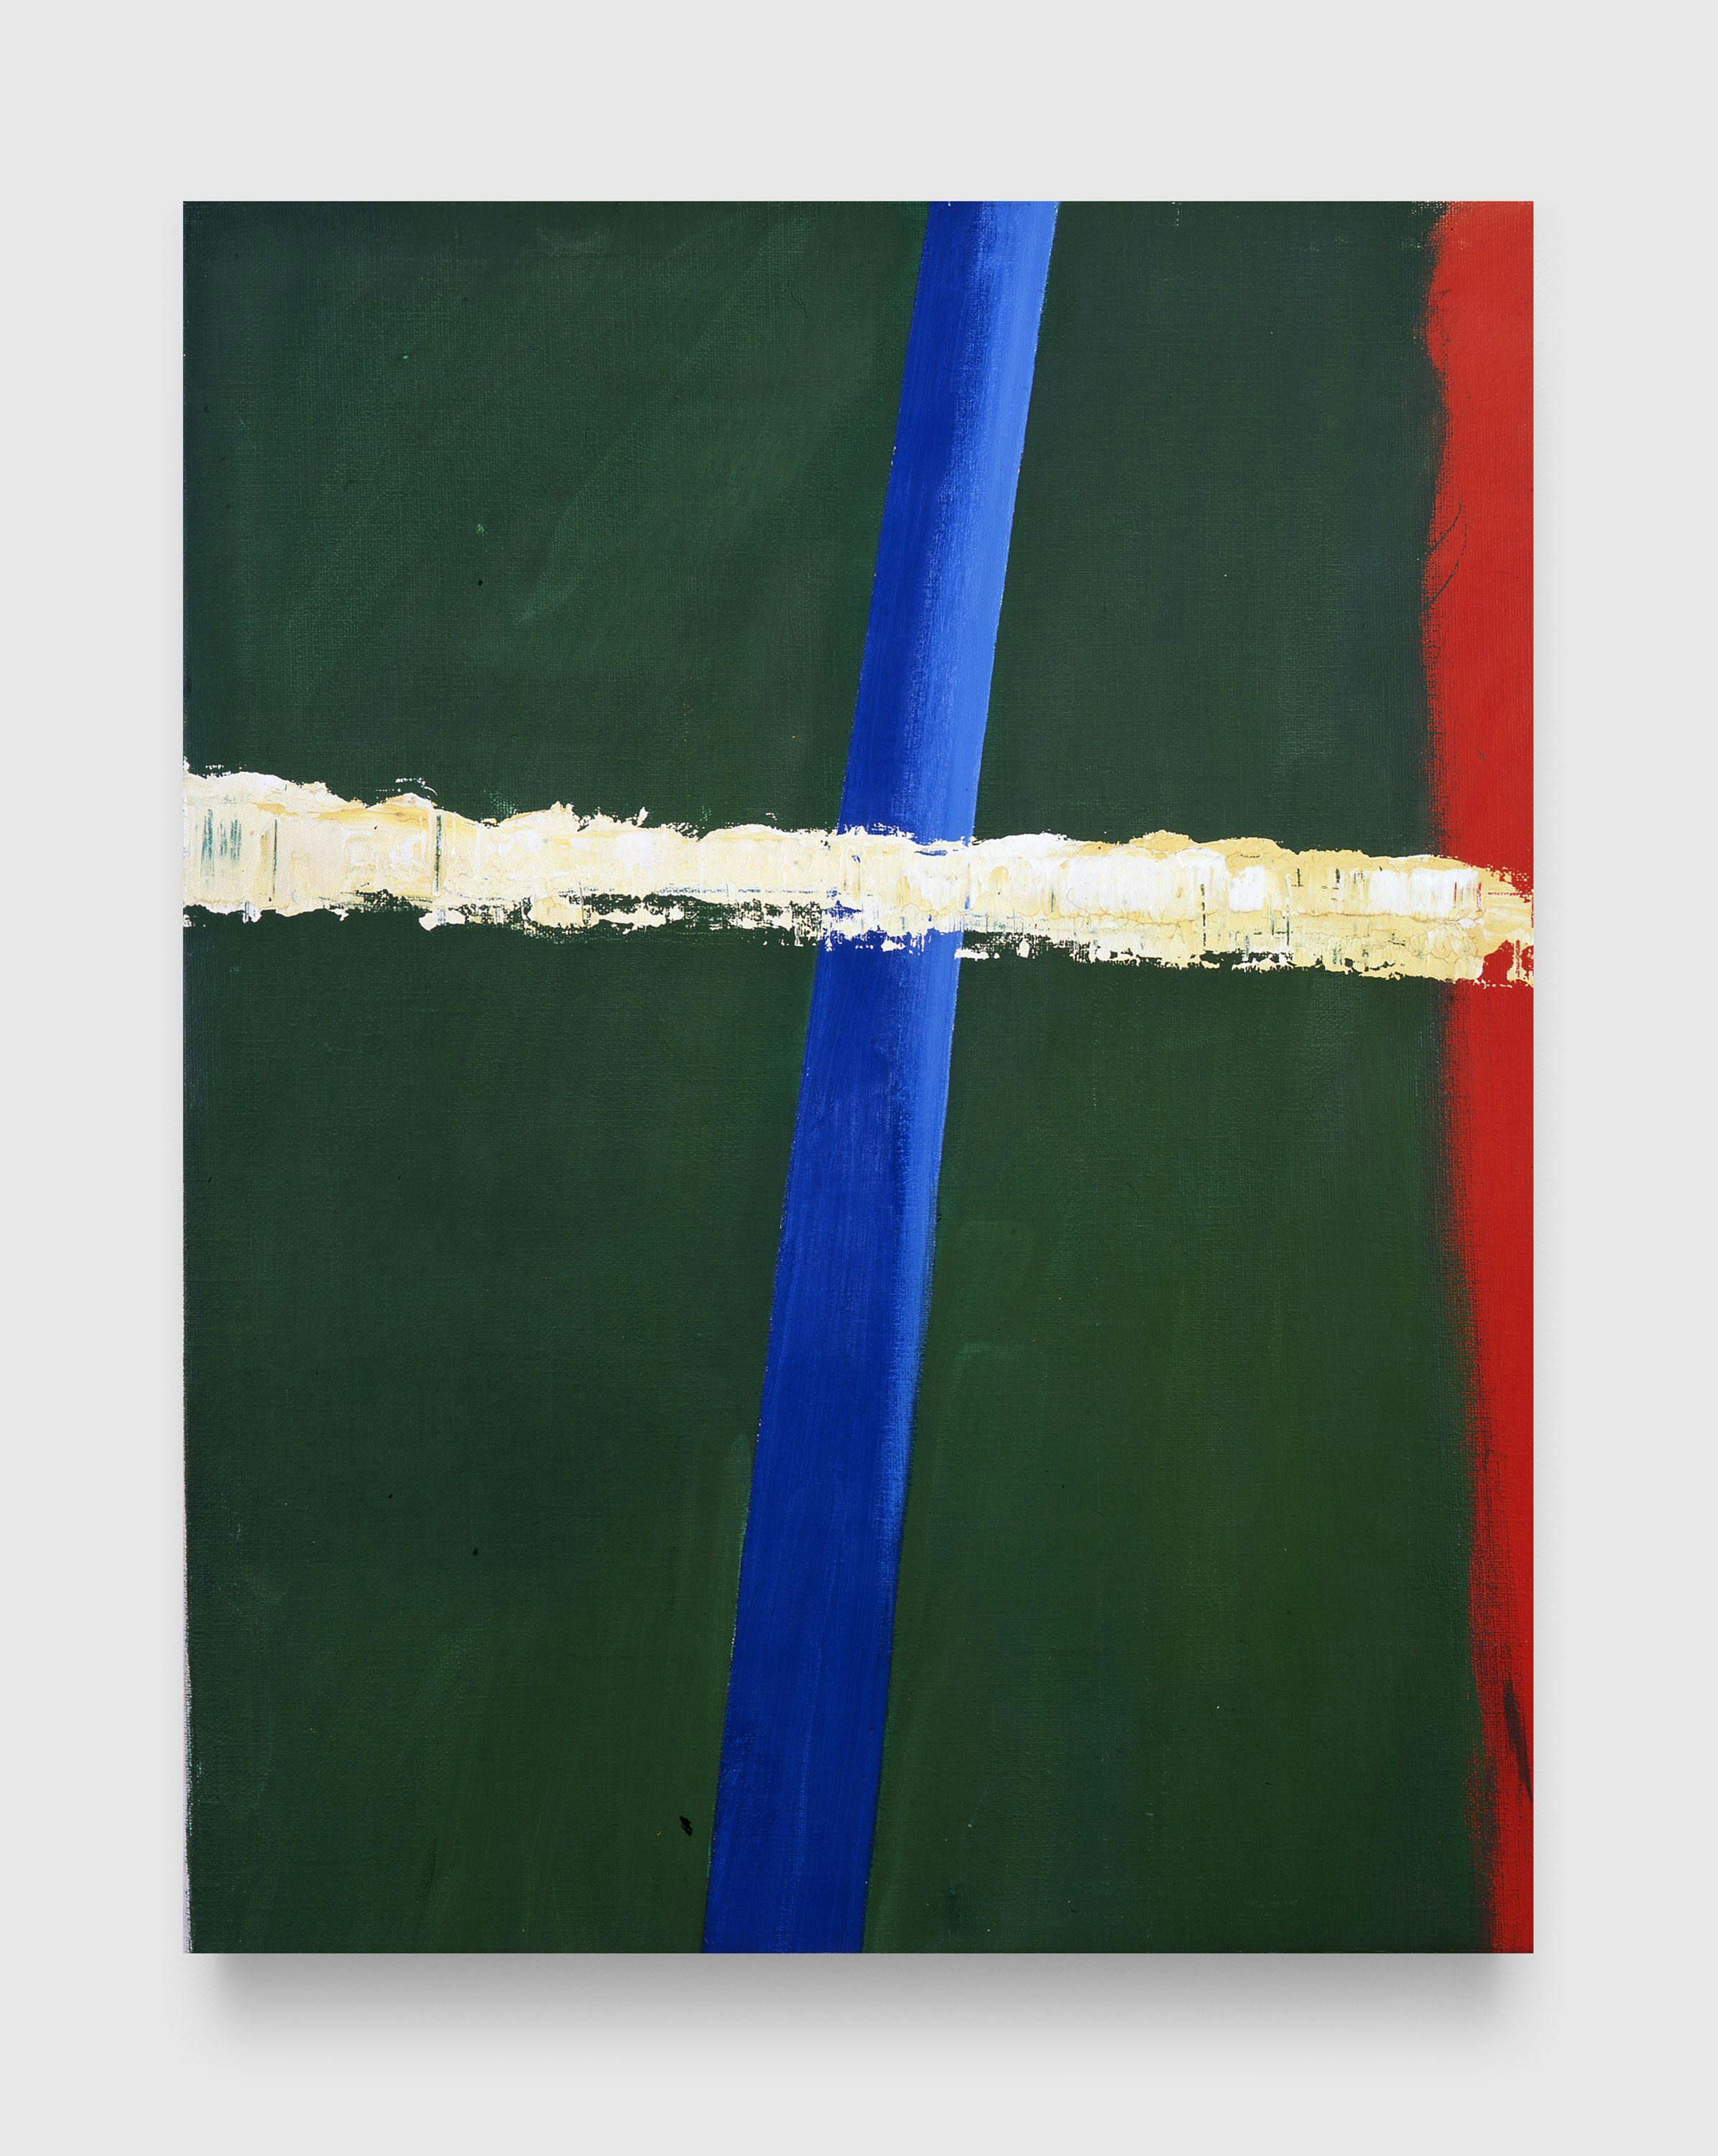 A painting by Raoul De Keyser, titled Steek 1, dated 1987 and 2005.